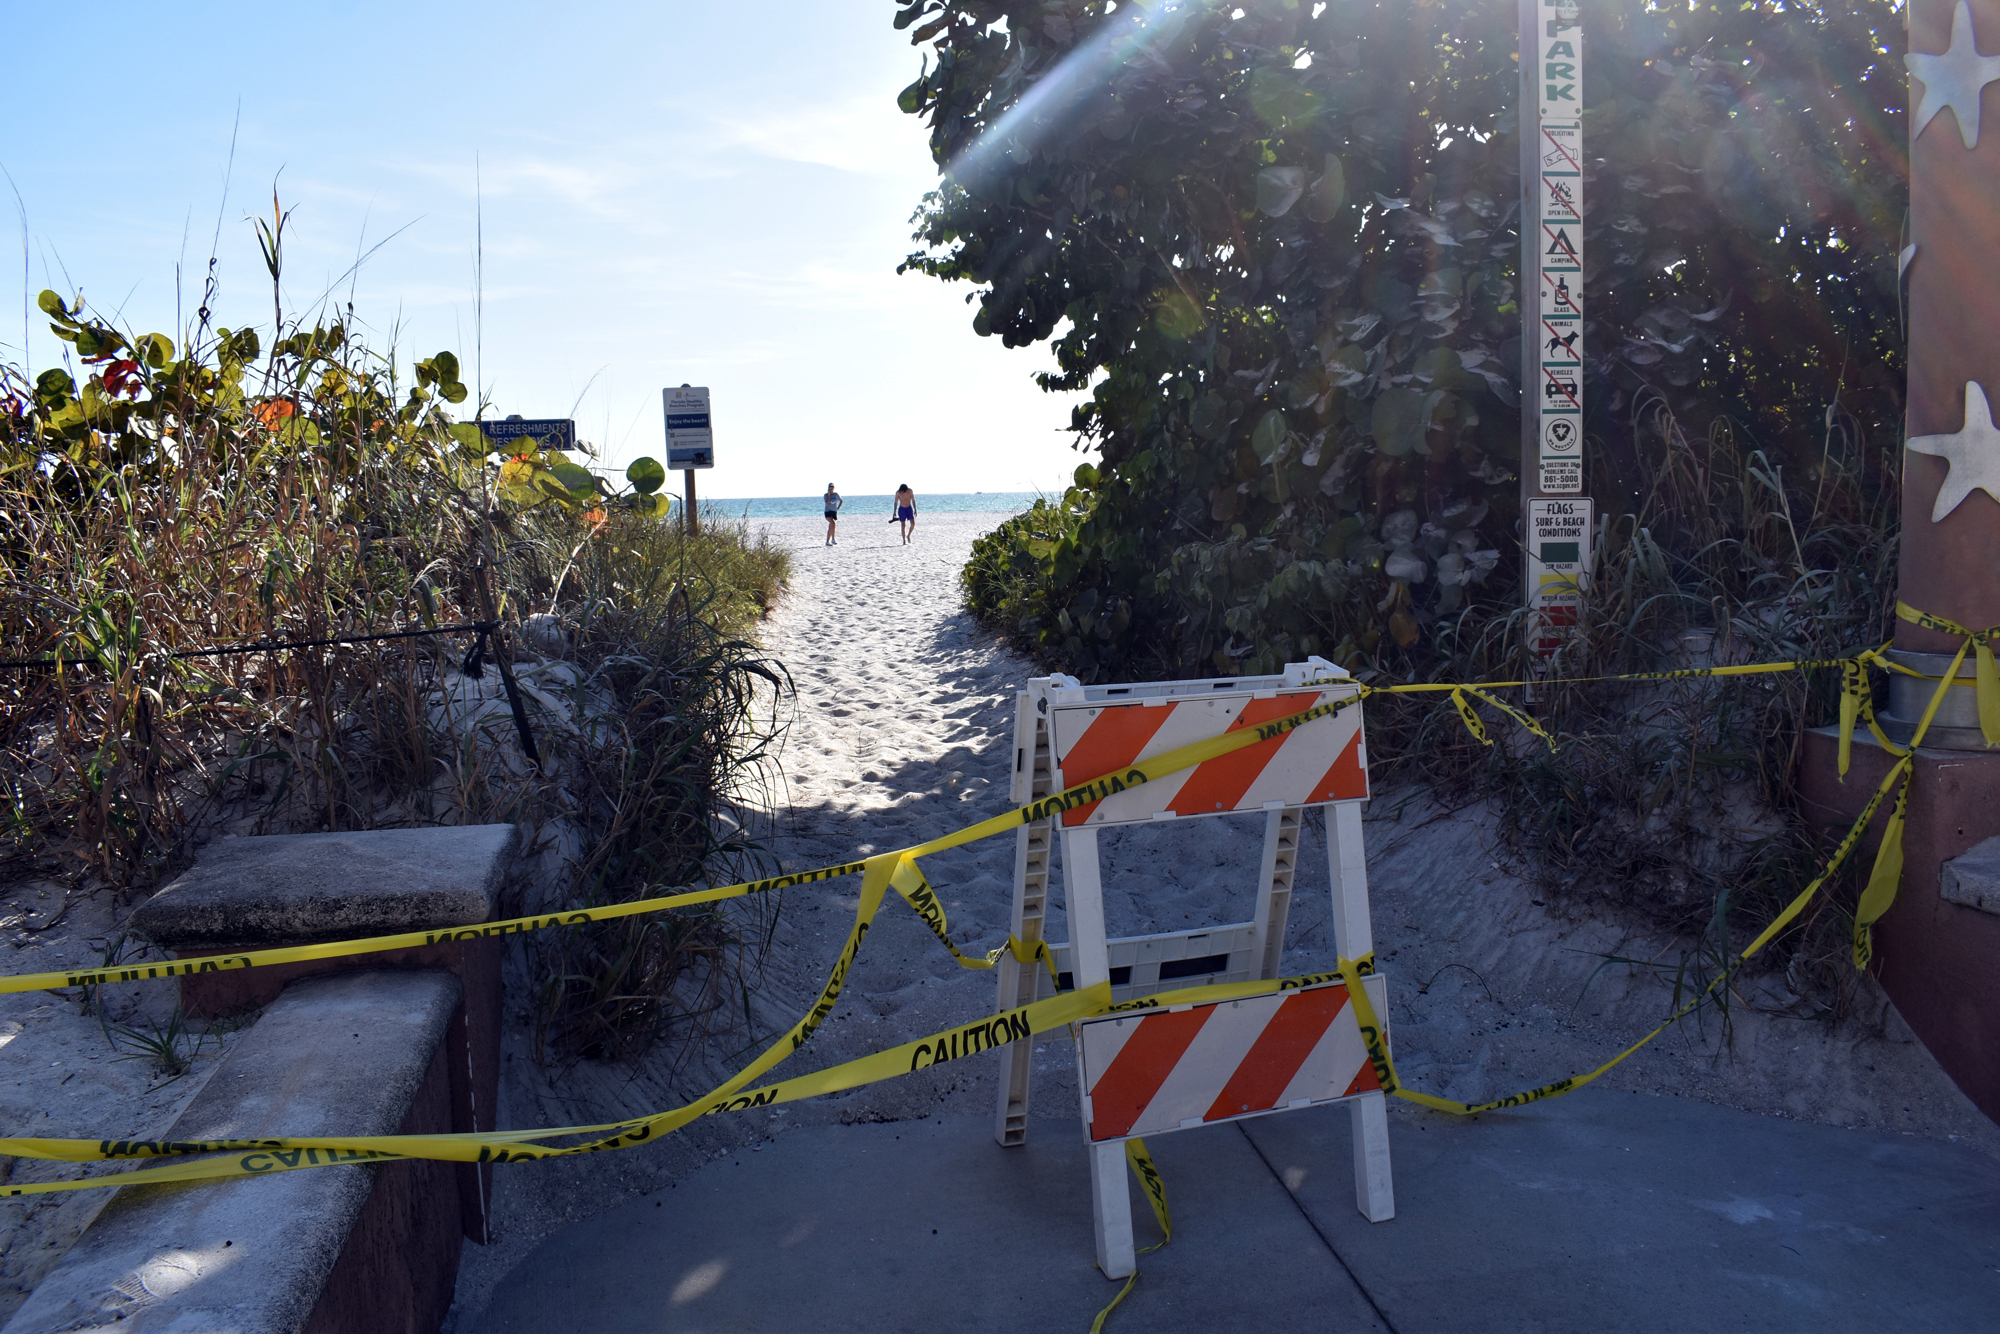 All walking trails to Lido Beach are cordoned off, but that didn't stop several from walking on the beach.